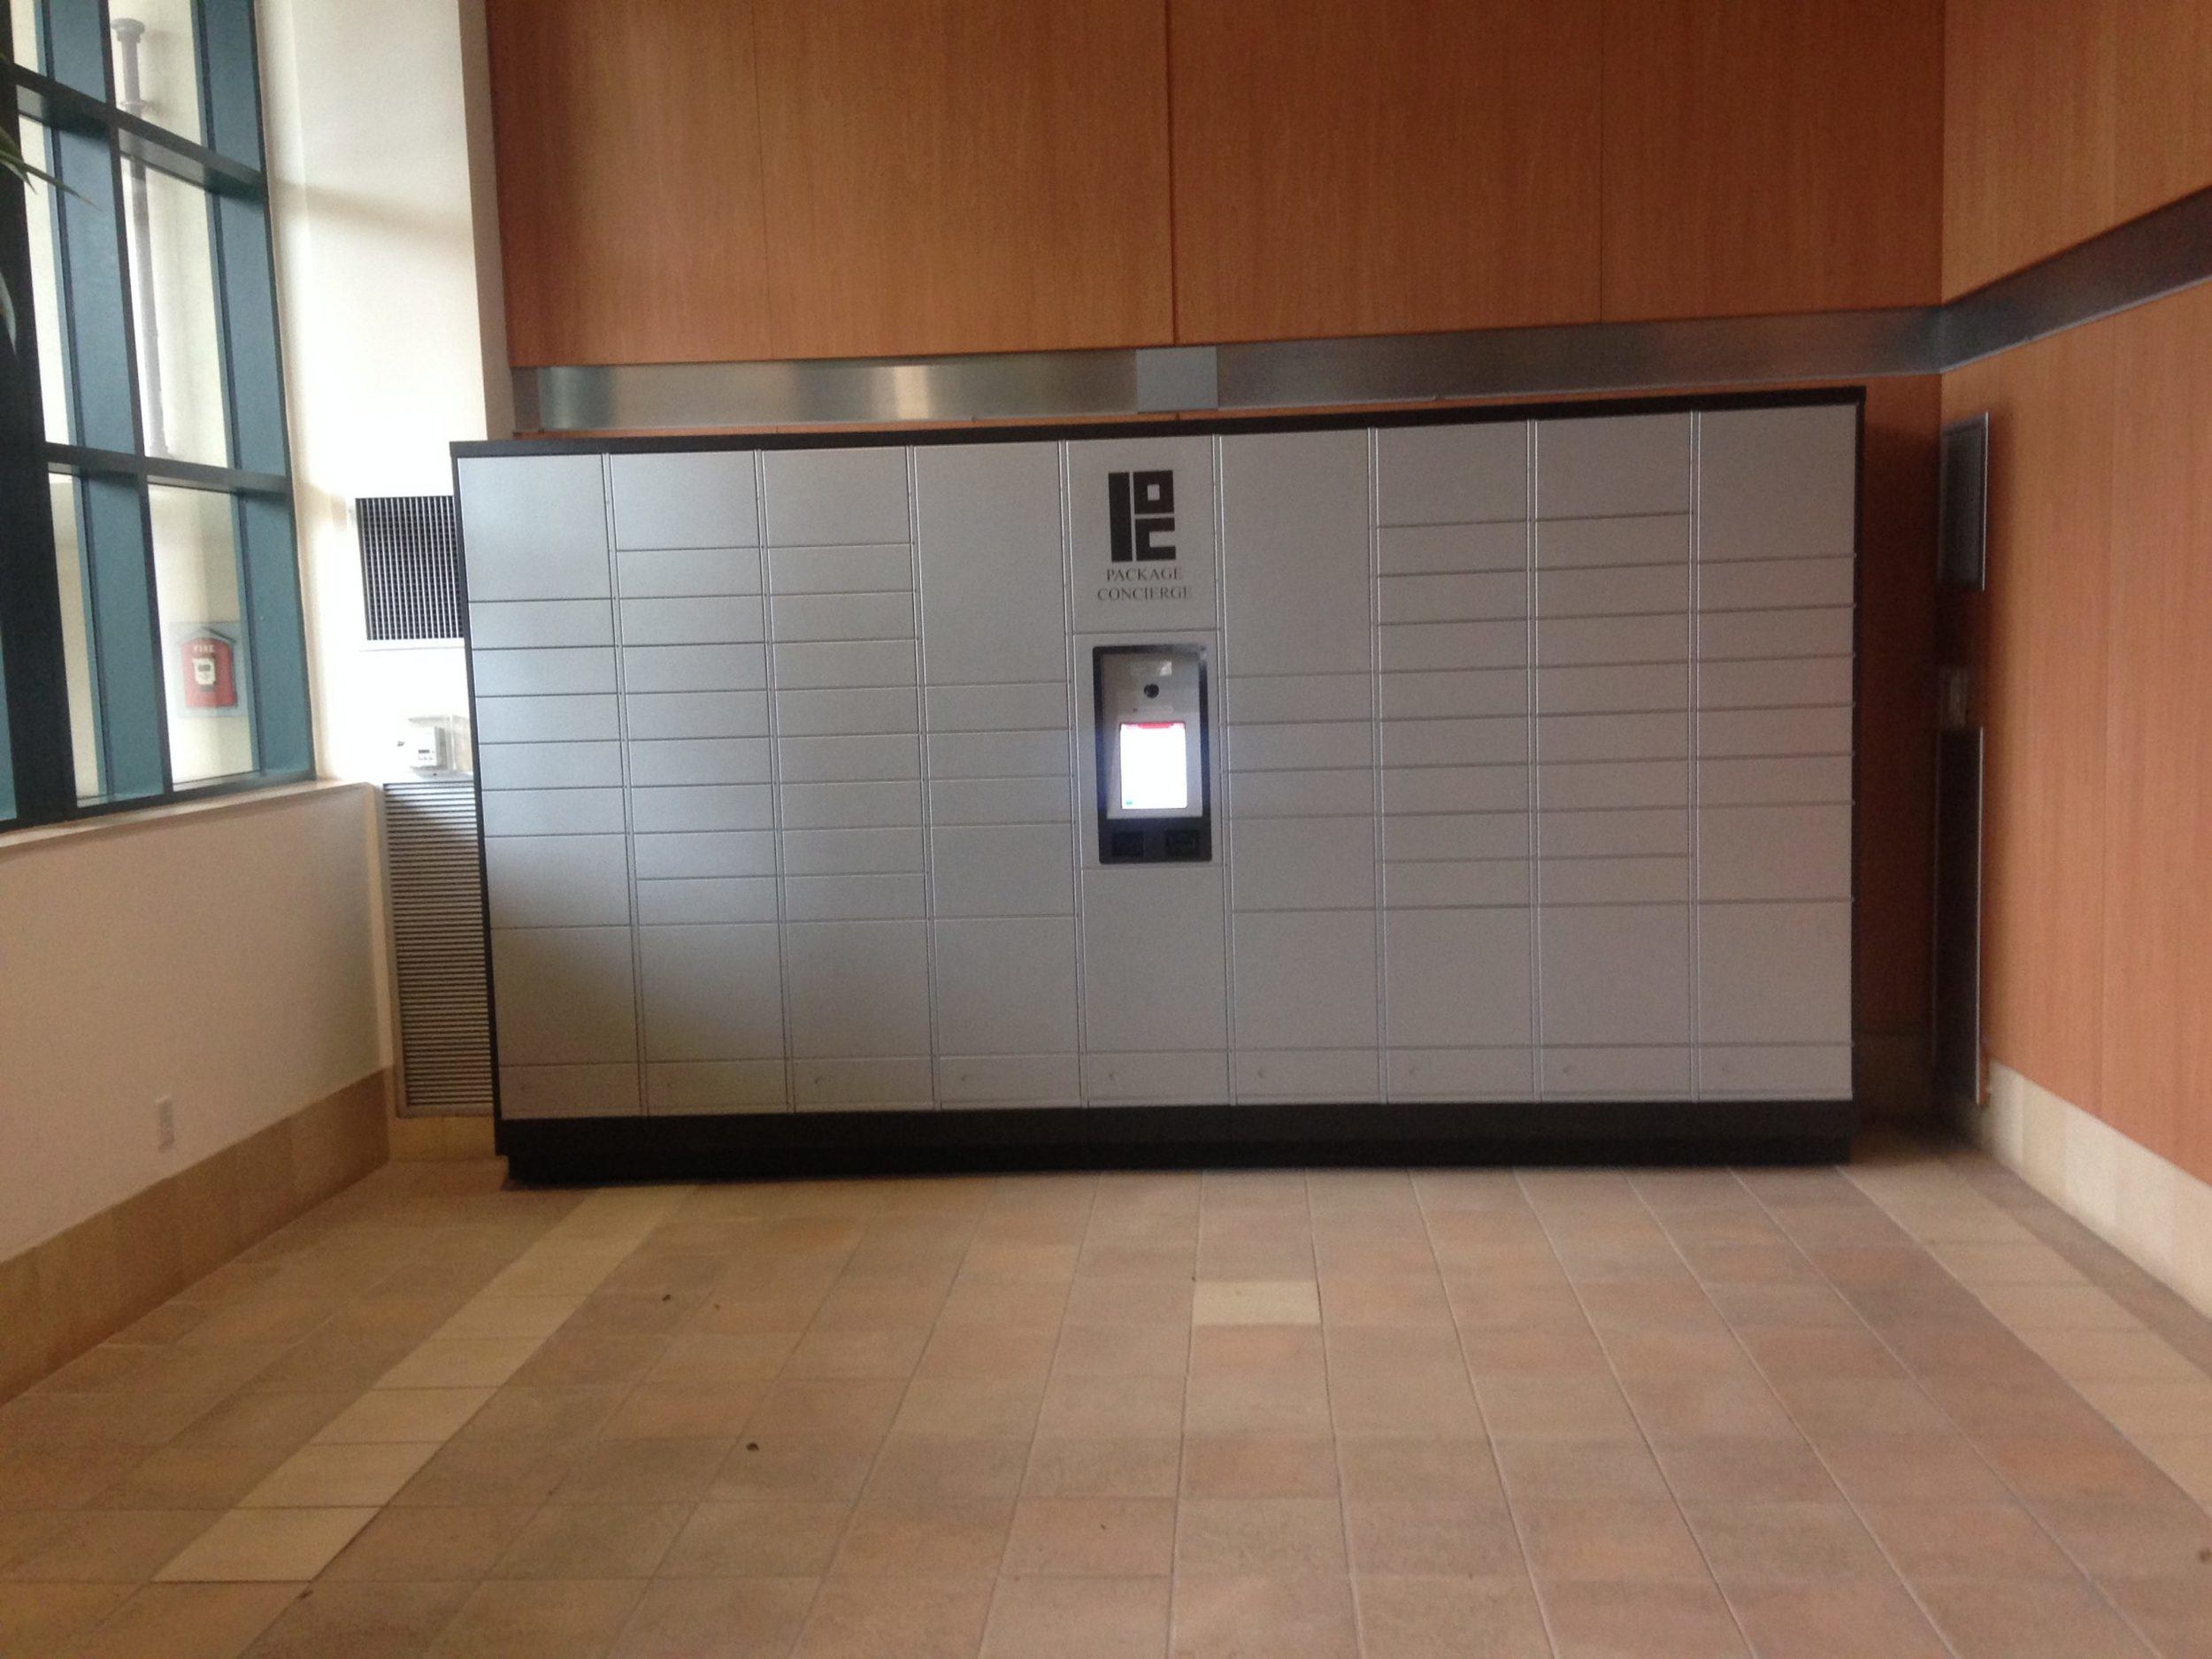 A Package Concierge® automated smart package locker system installed at Cambridge Oxford in gray with black trim